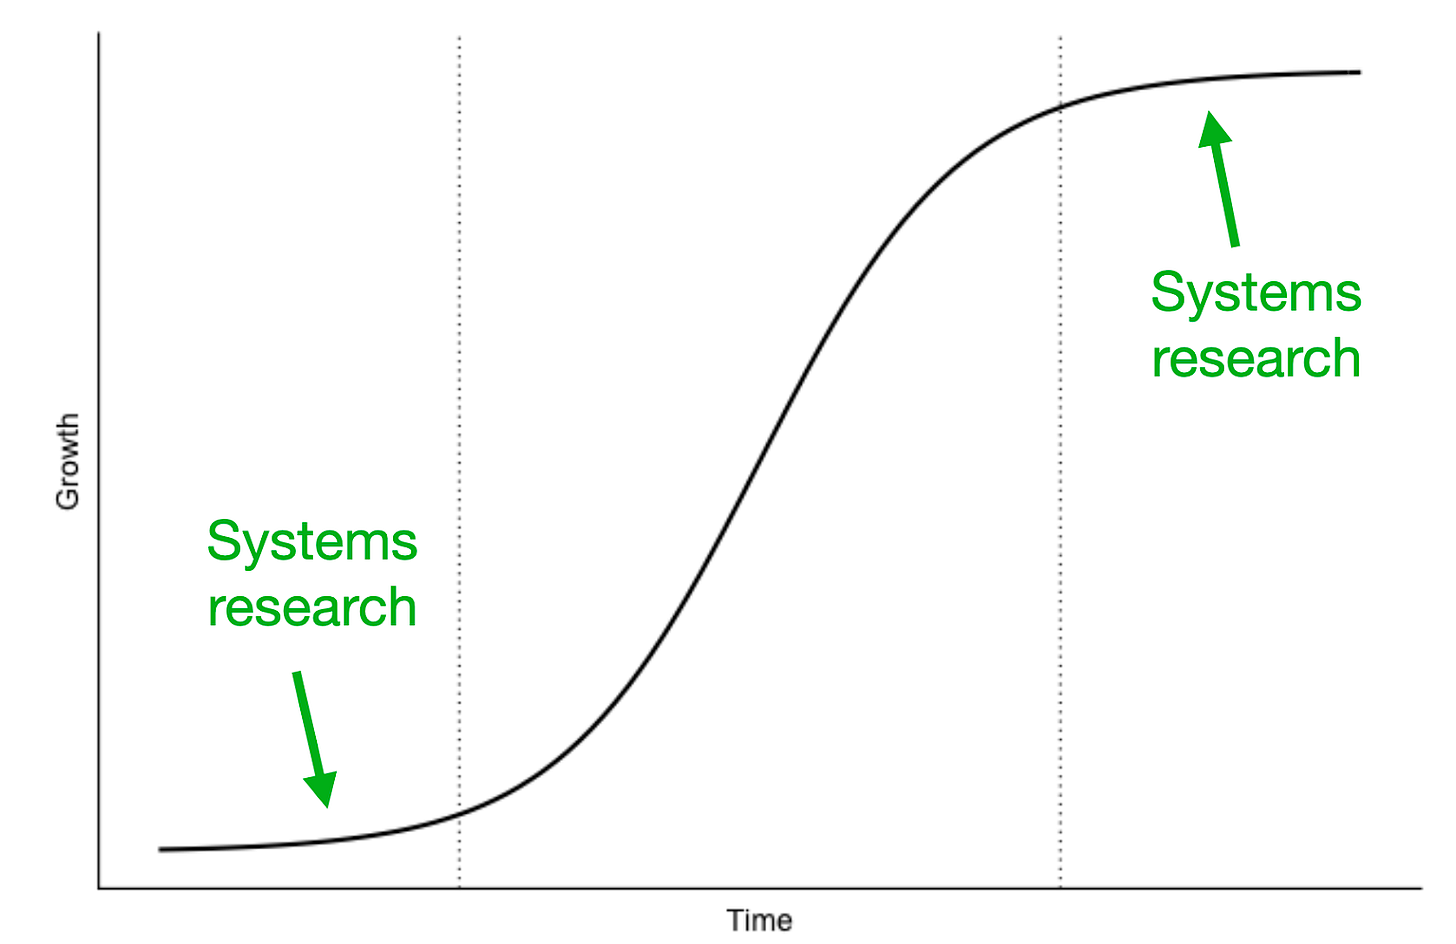 The use of the term systems research roughly reflects how much of it gets done